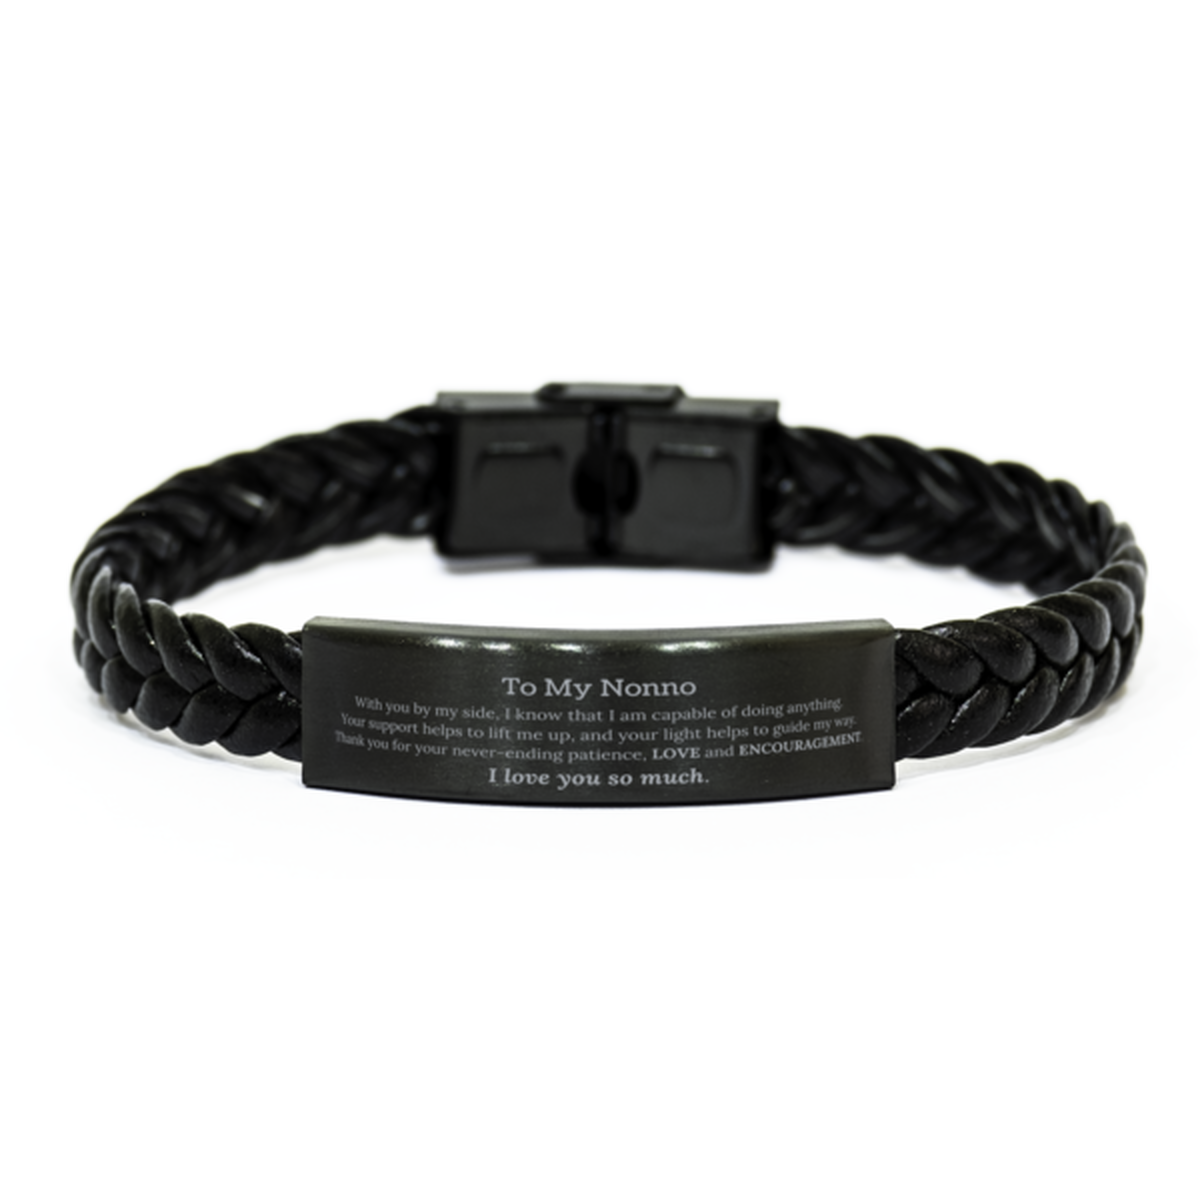 Appreciation Nonno Braided Leather Bracelet Gifts, To My Nonno Birthday Christmas Wedding Keepsake Gifts for Nonno With you by my side, I know that I am capable of doing anything. I love you so much